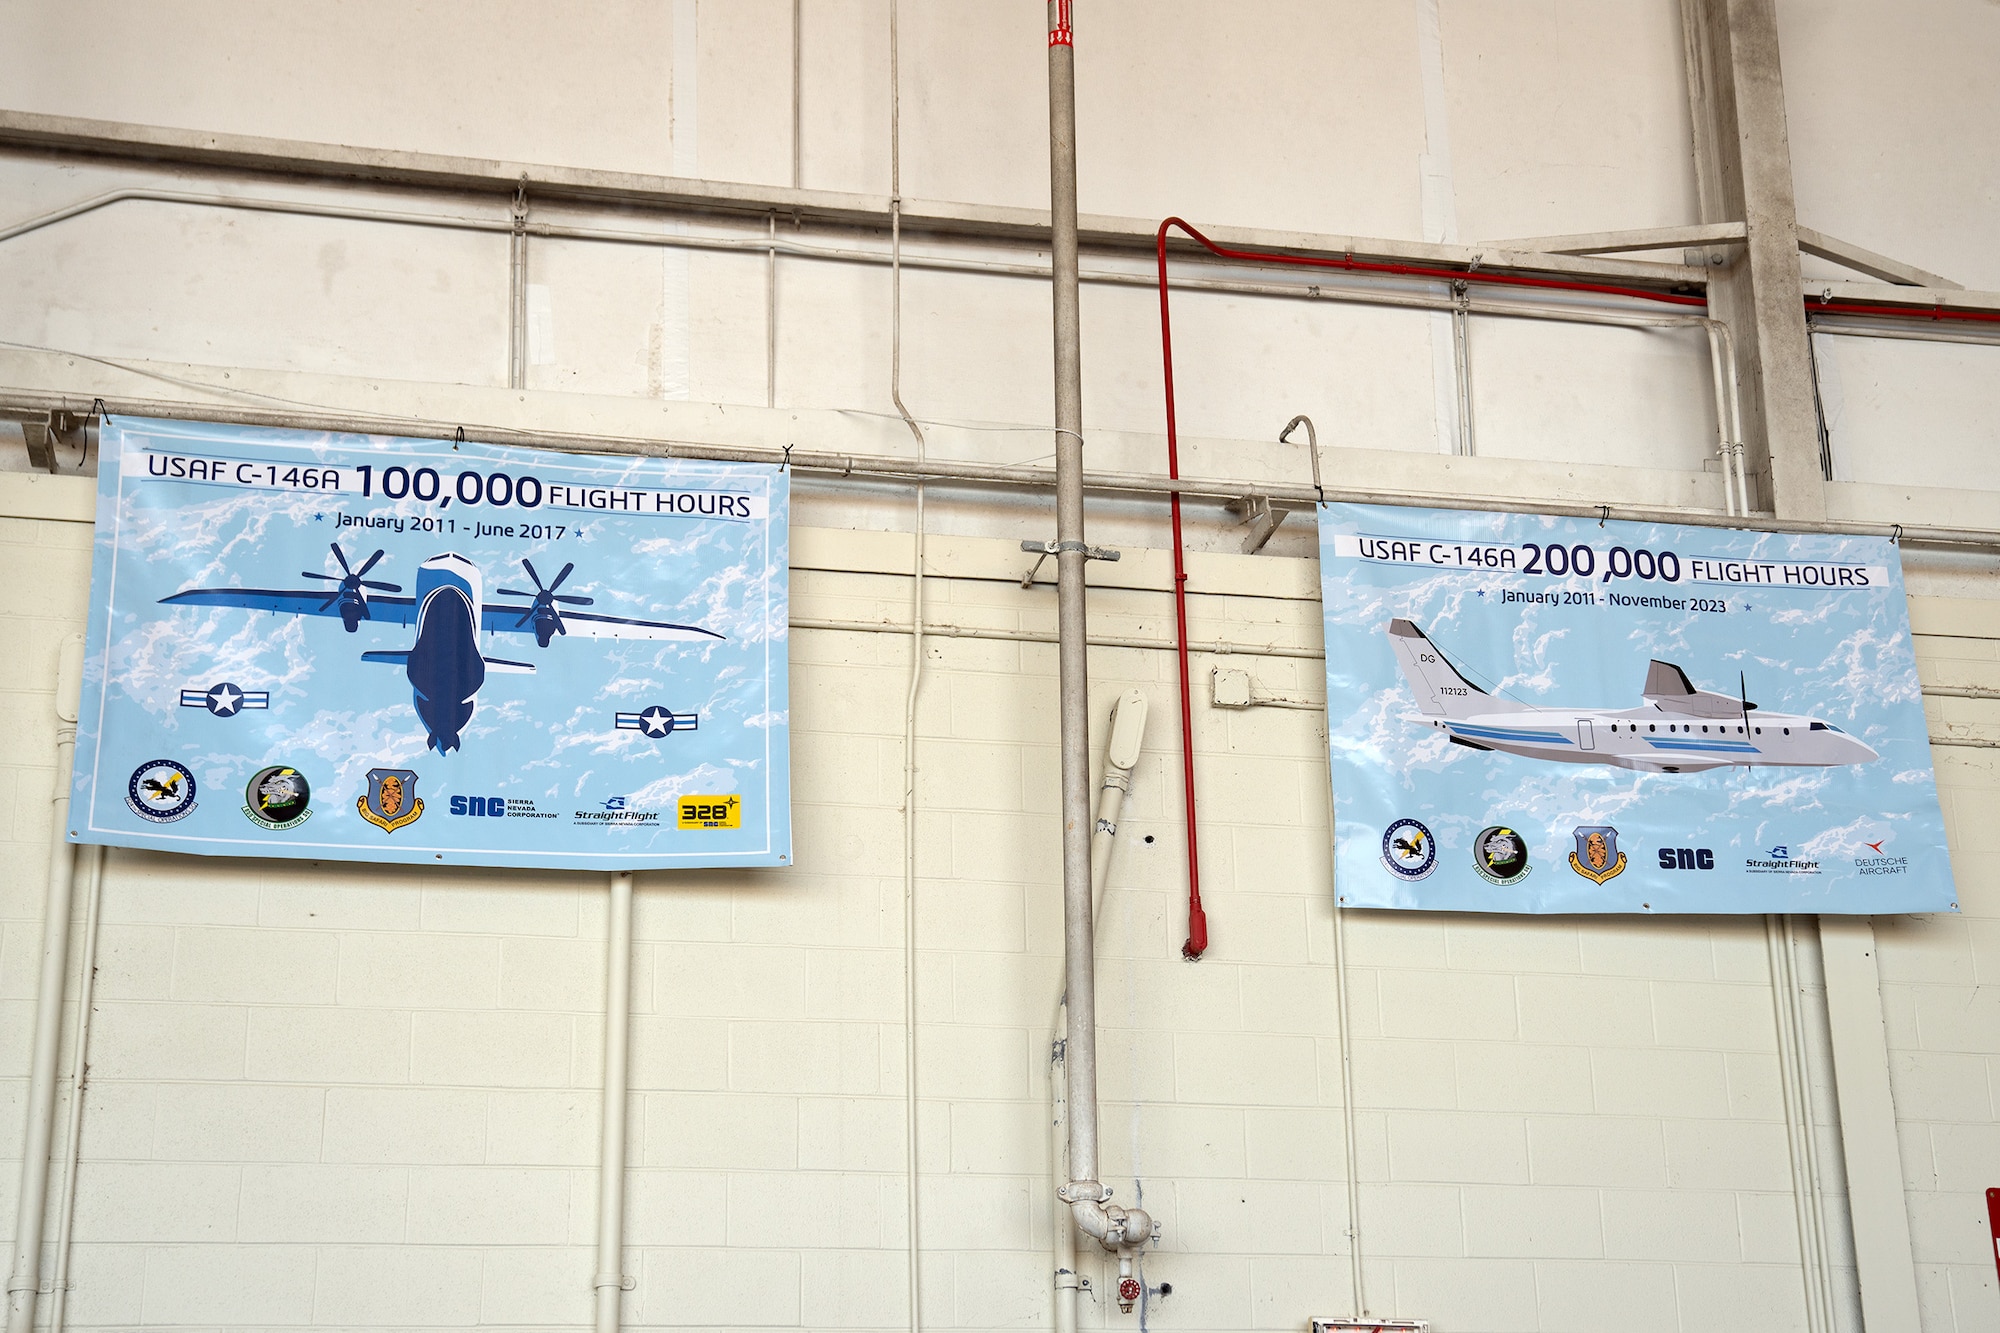 Two banners featuring aircraft demarcate milestones in flight hours and hang on a bare cement block wall